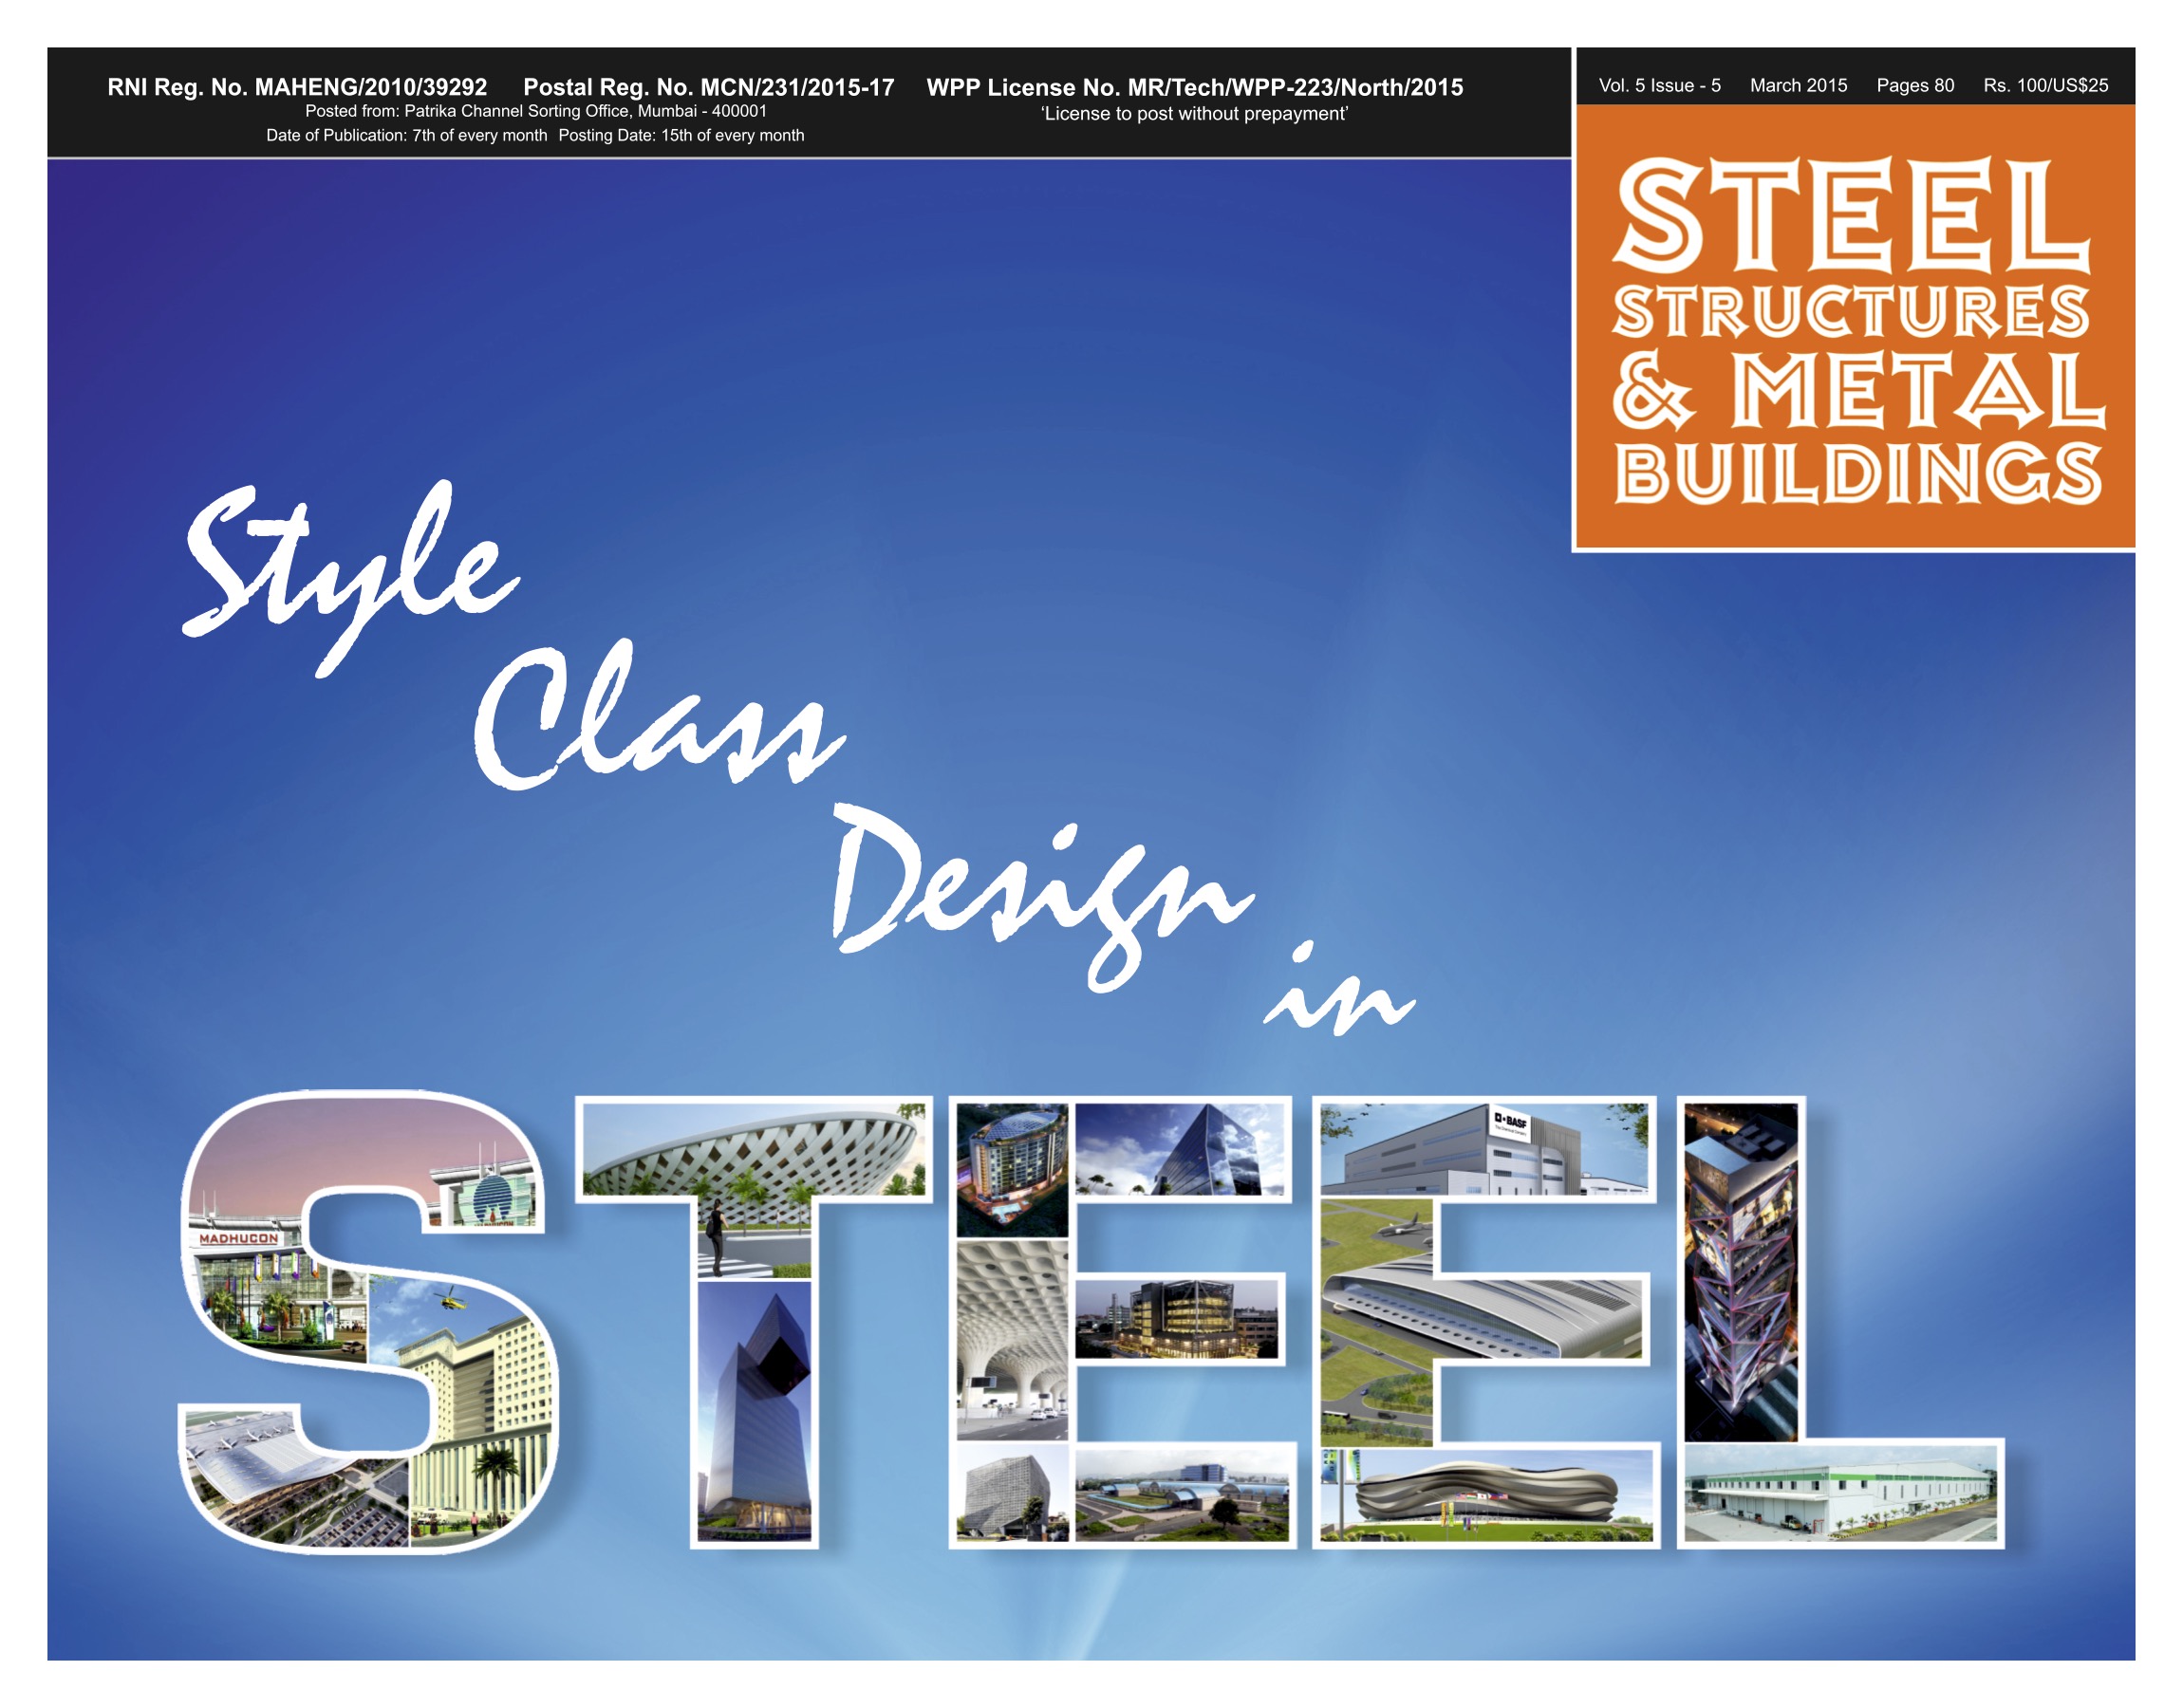 Steel Structures and Metal Buildings - OBO Bettermann